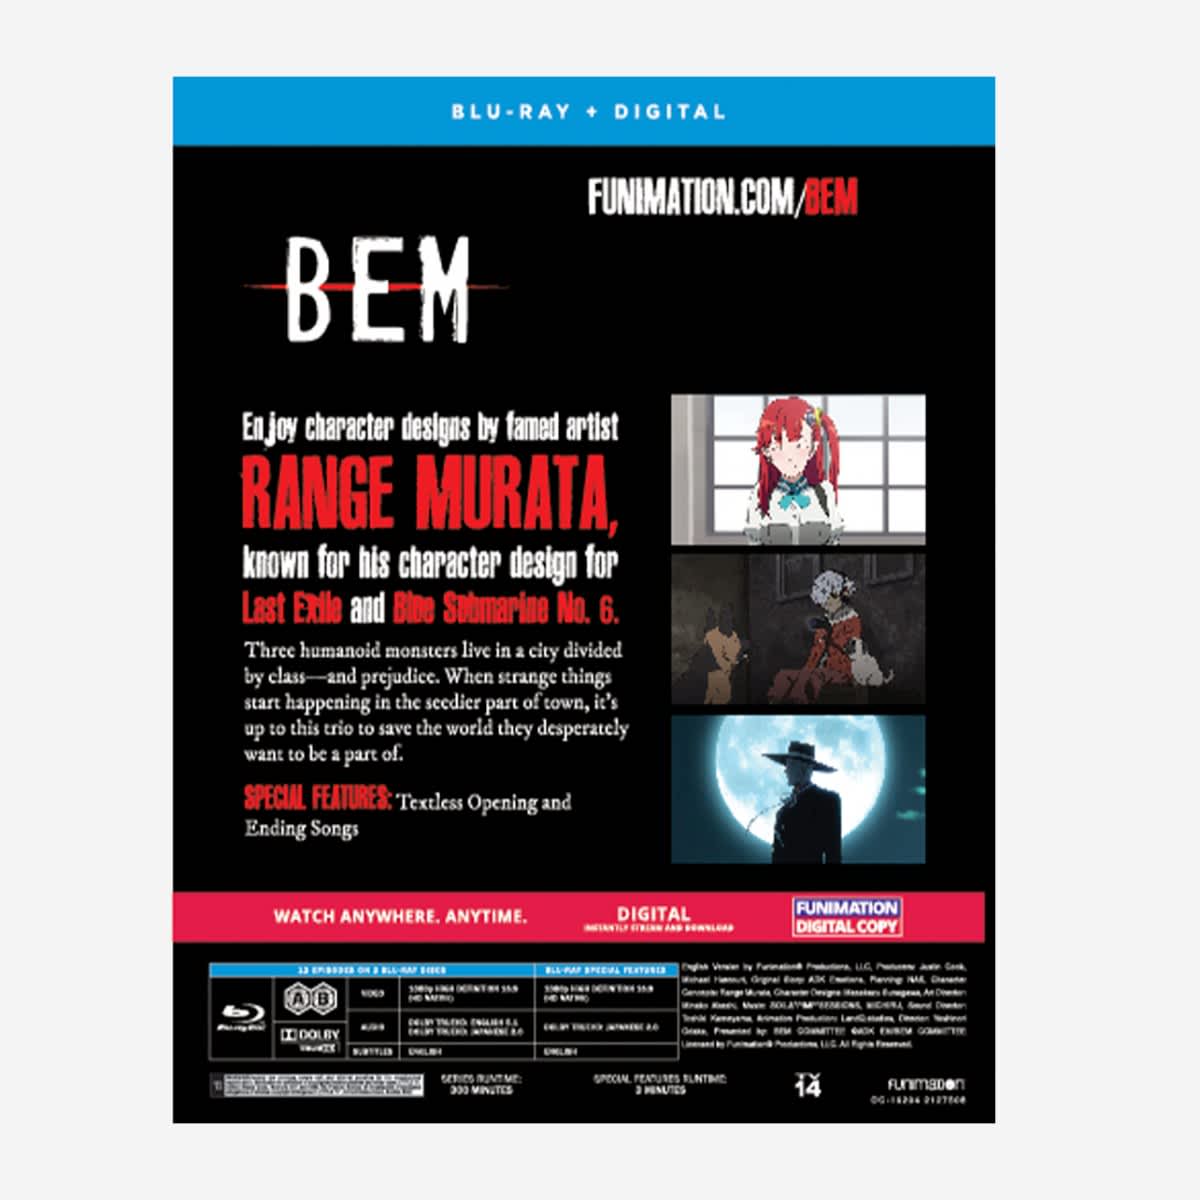 BEM - The Complete Series - Blu-ray - BEM - The Complete Series